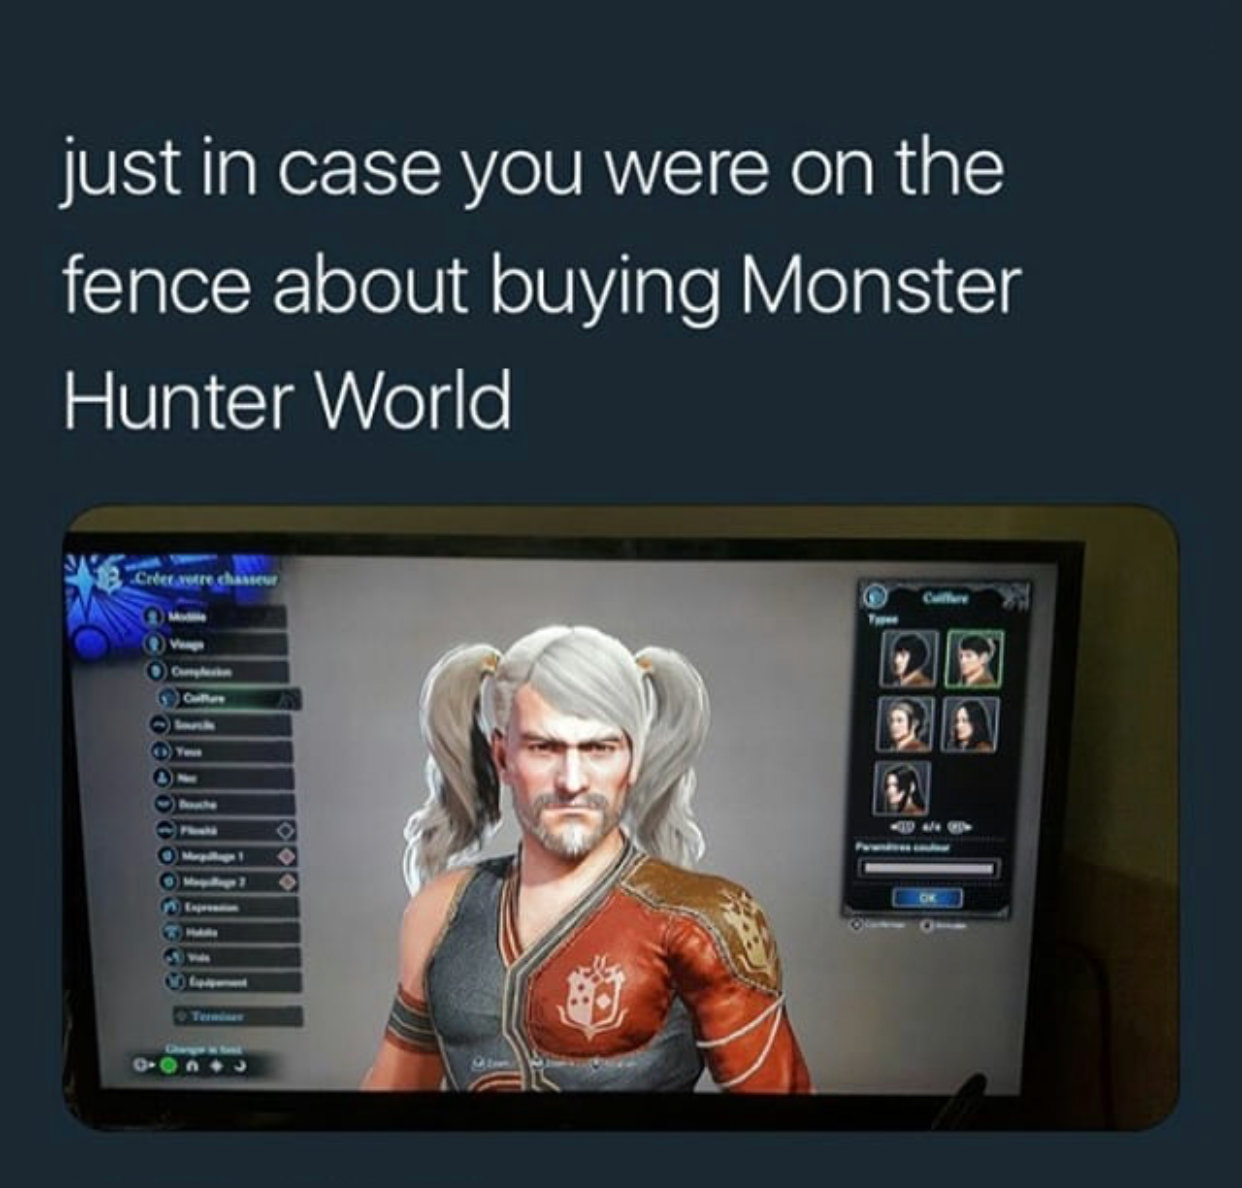 mhw funny character - just in case you were on the fence about buying Monster Hunter World Crer une chansowe O Cum ele Ooo